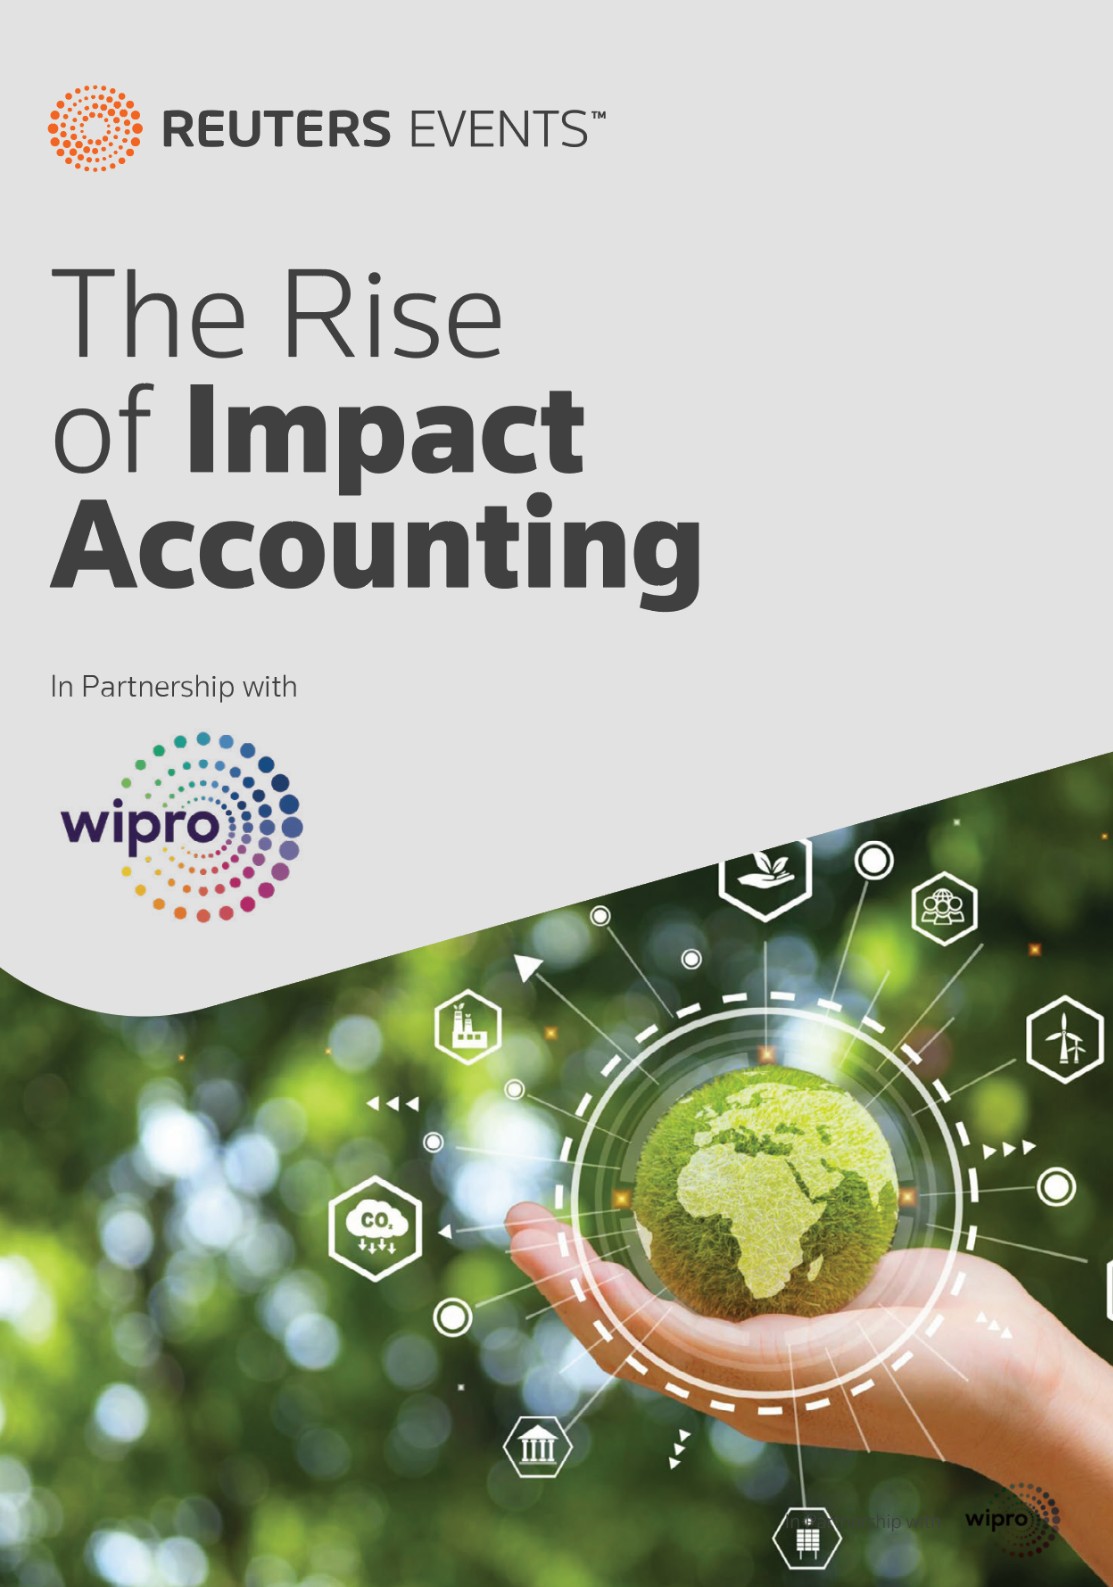 Introducing 'The Rise of Impact Accounting' - A Report by Reuters